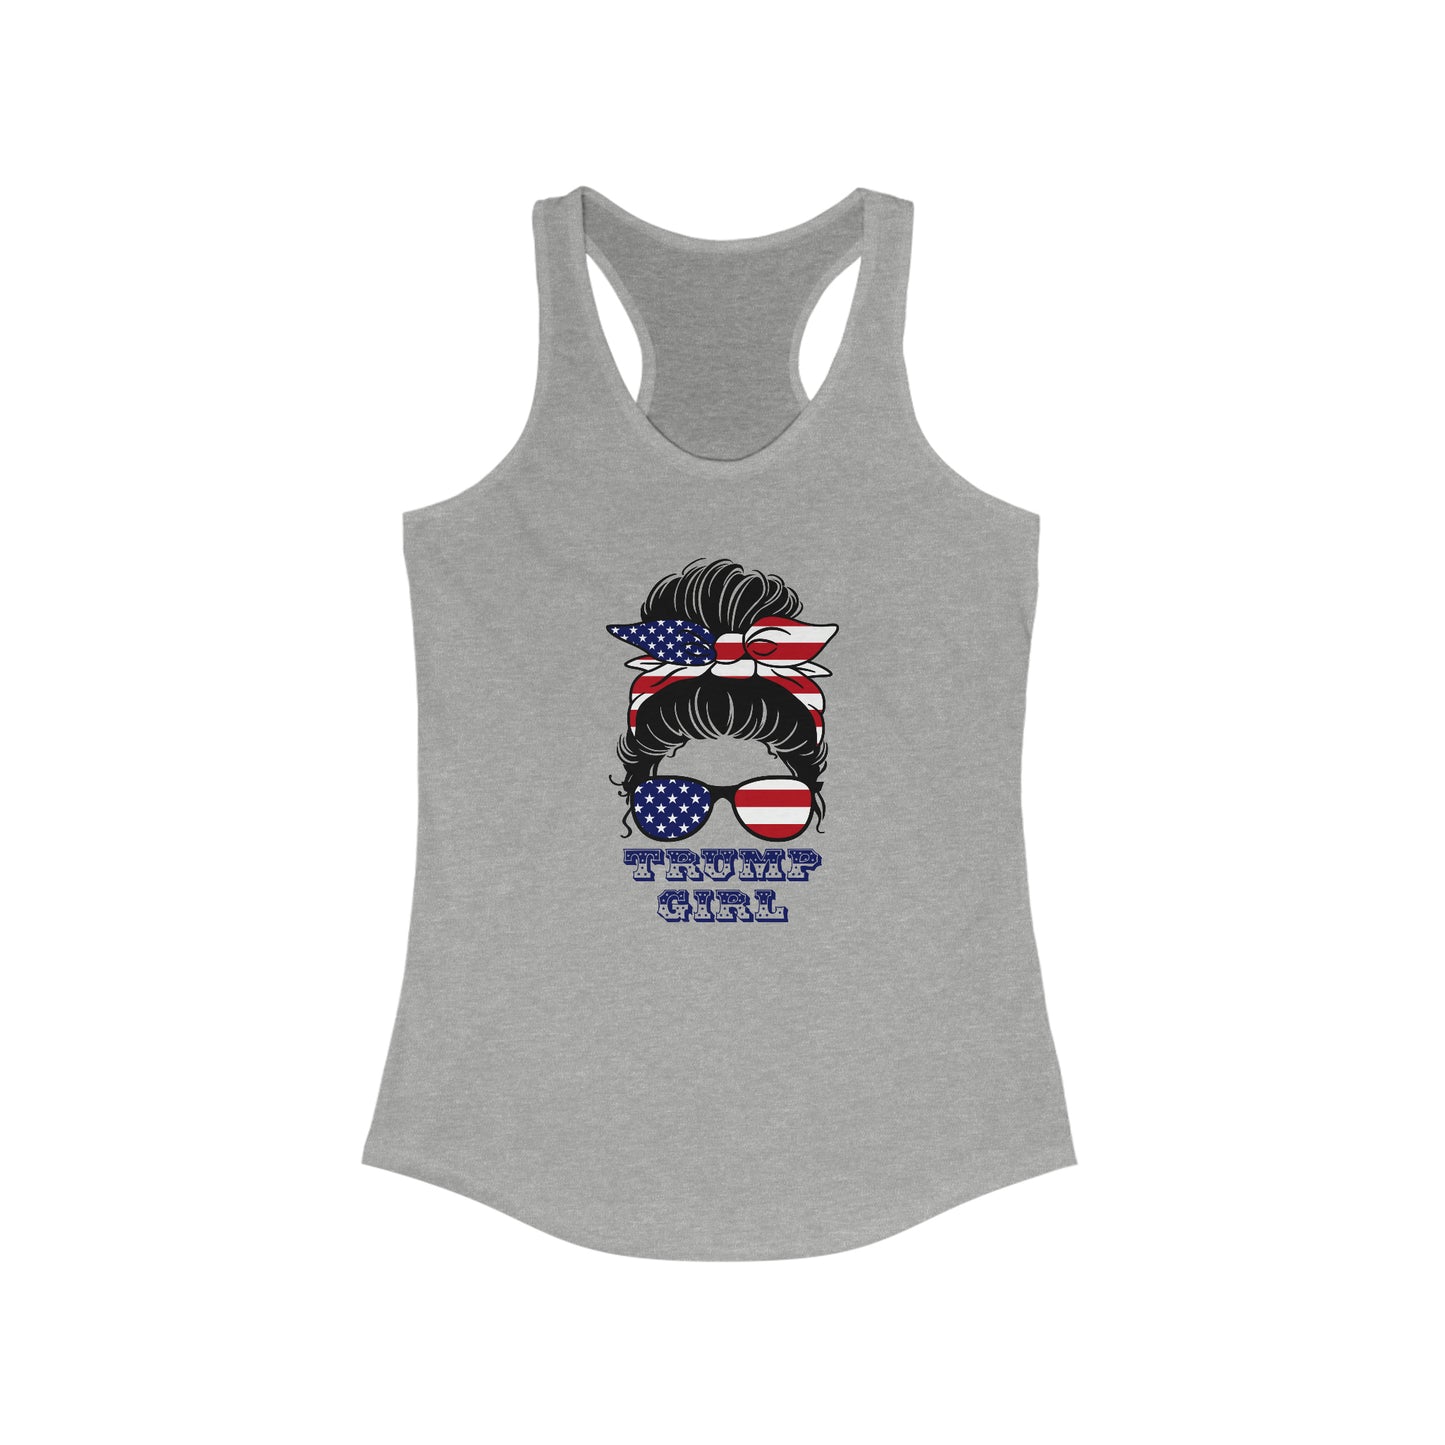 Trump Girl Tank Top For Conservative Tank Top For Patriotic Shirt For Conservative Woman Messy Bun Shirt For Mother's Day Gift For Conservative Gift Idea